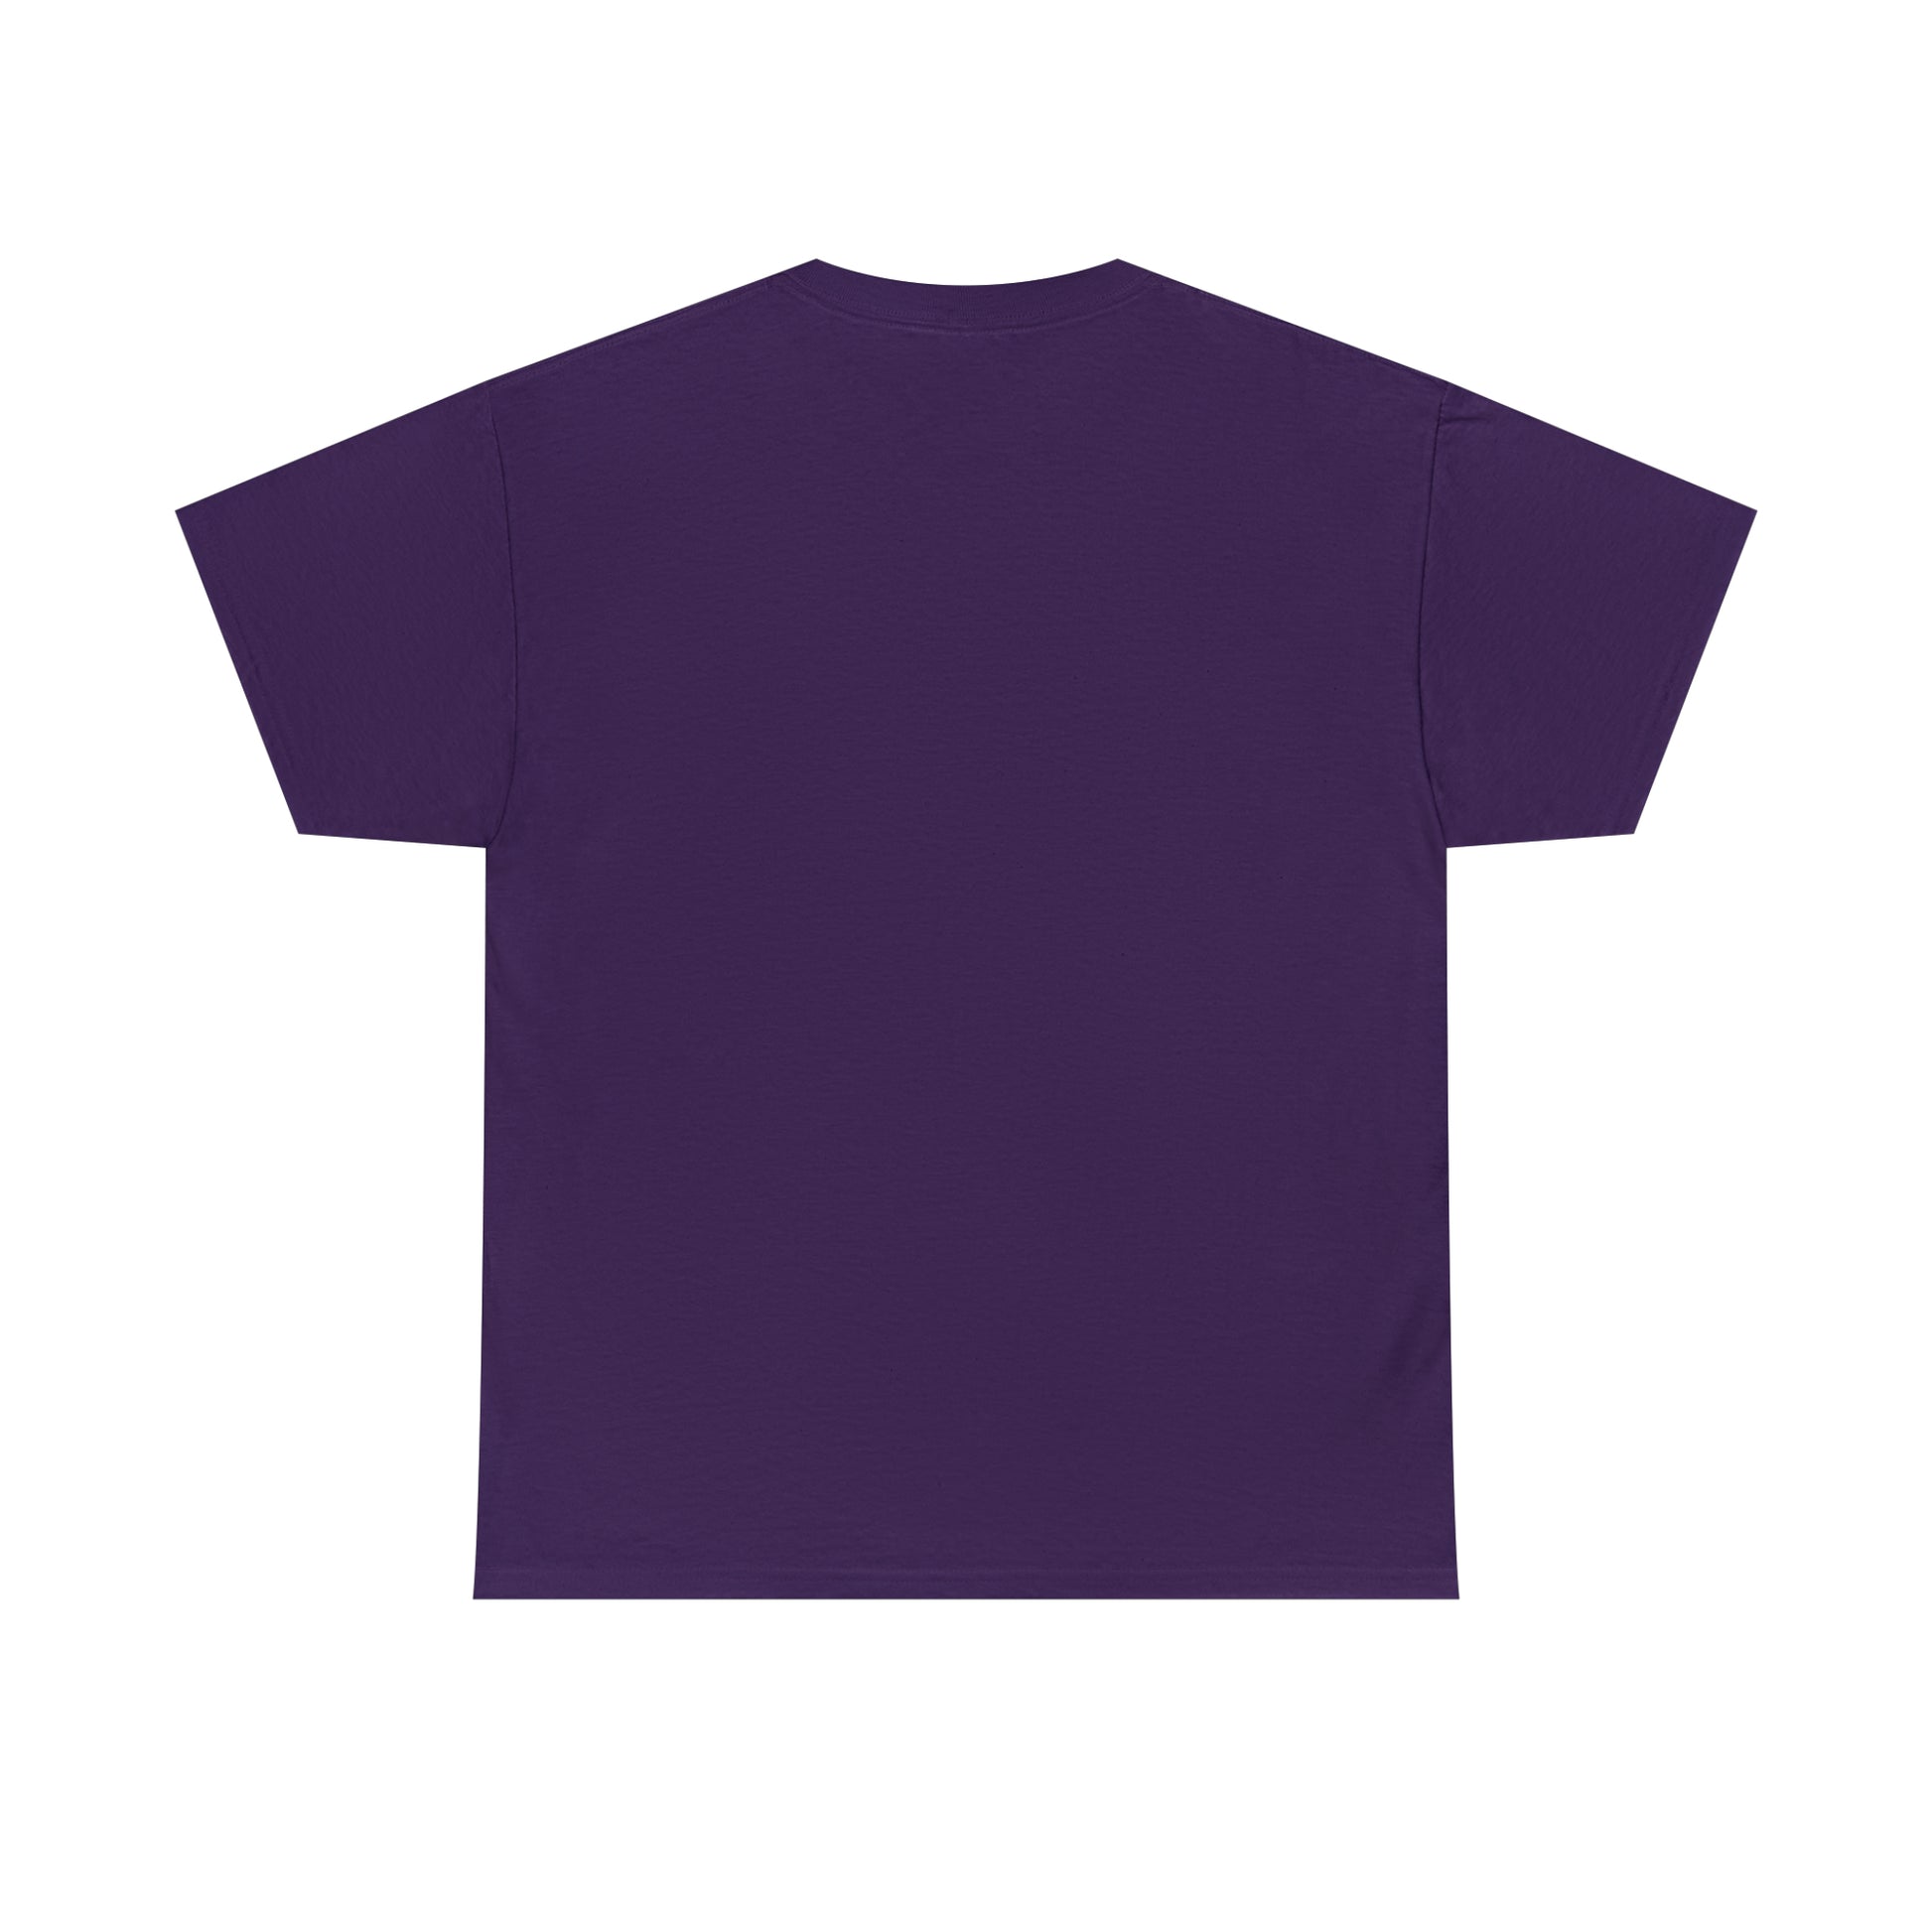 Flat back view of the Purple shirt